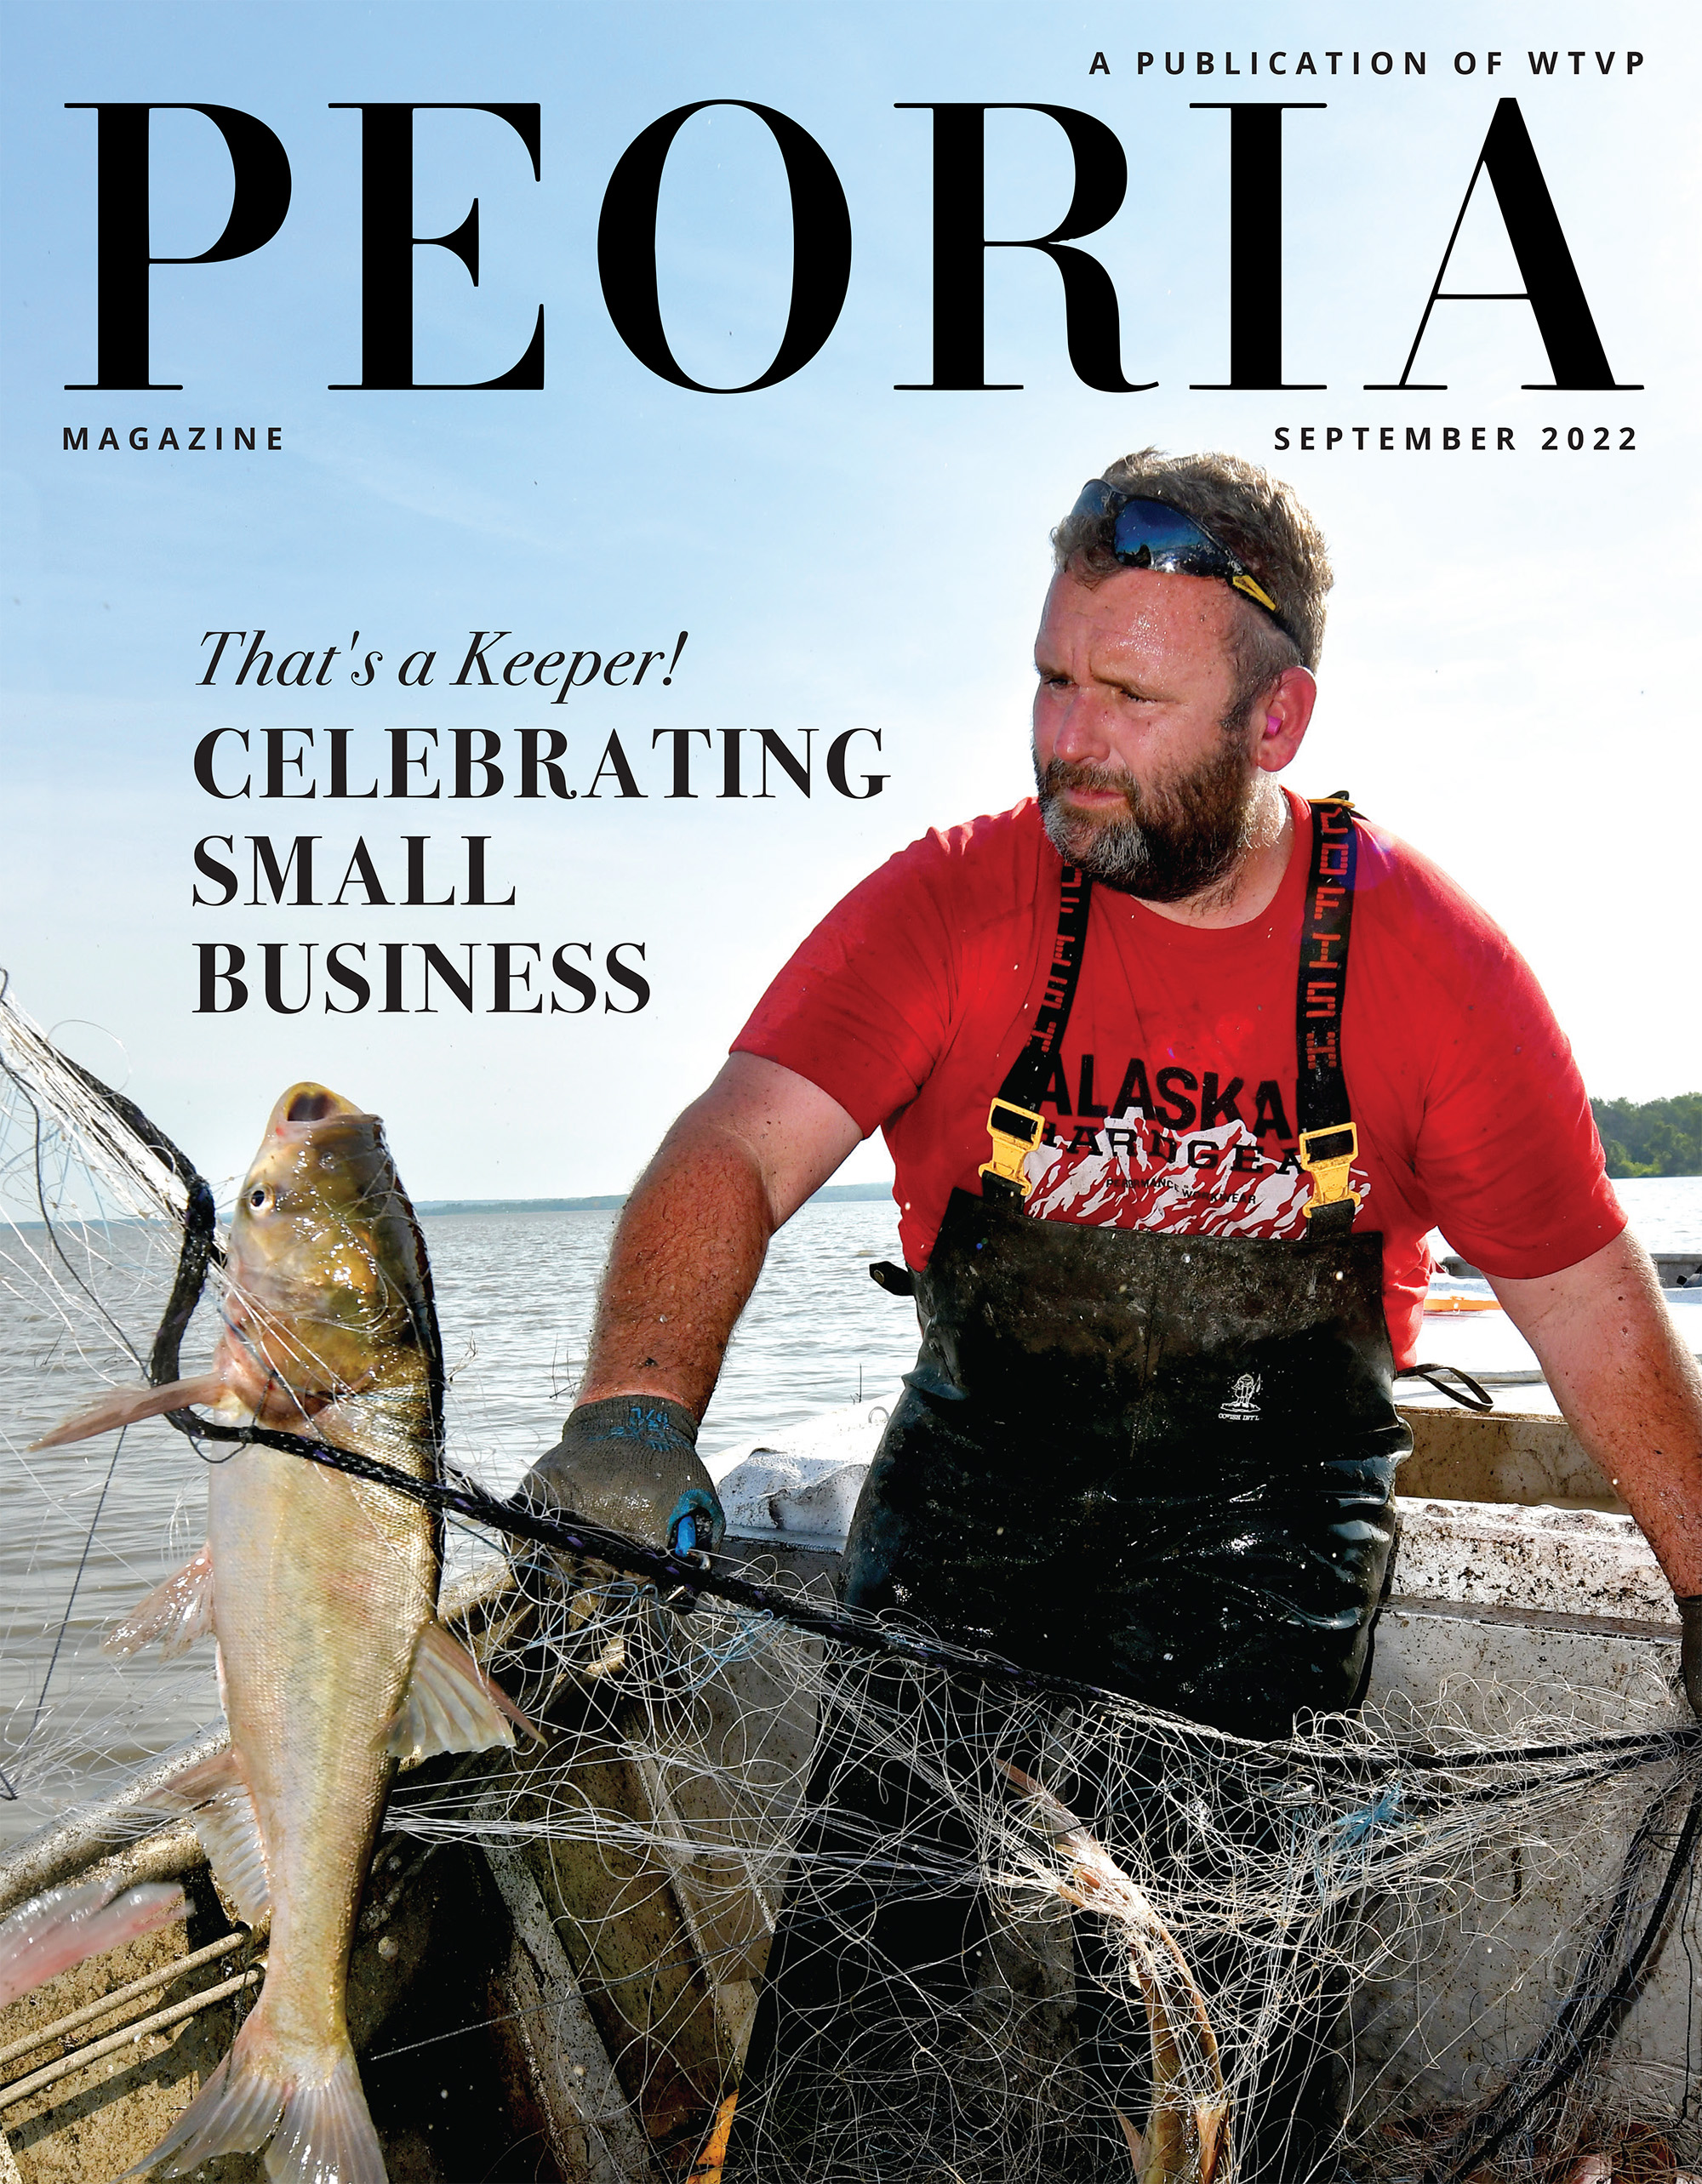 Cover of the September 2022 Peoria Magazine - Photo of a fisherman with a large Asian Carp in a fishing net.